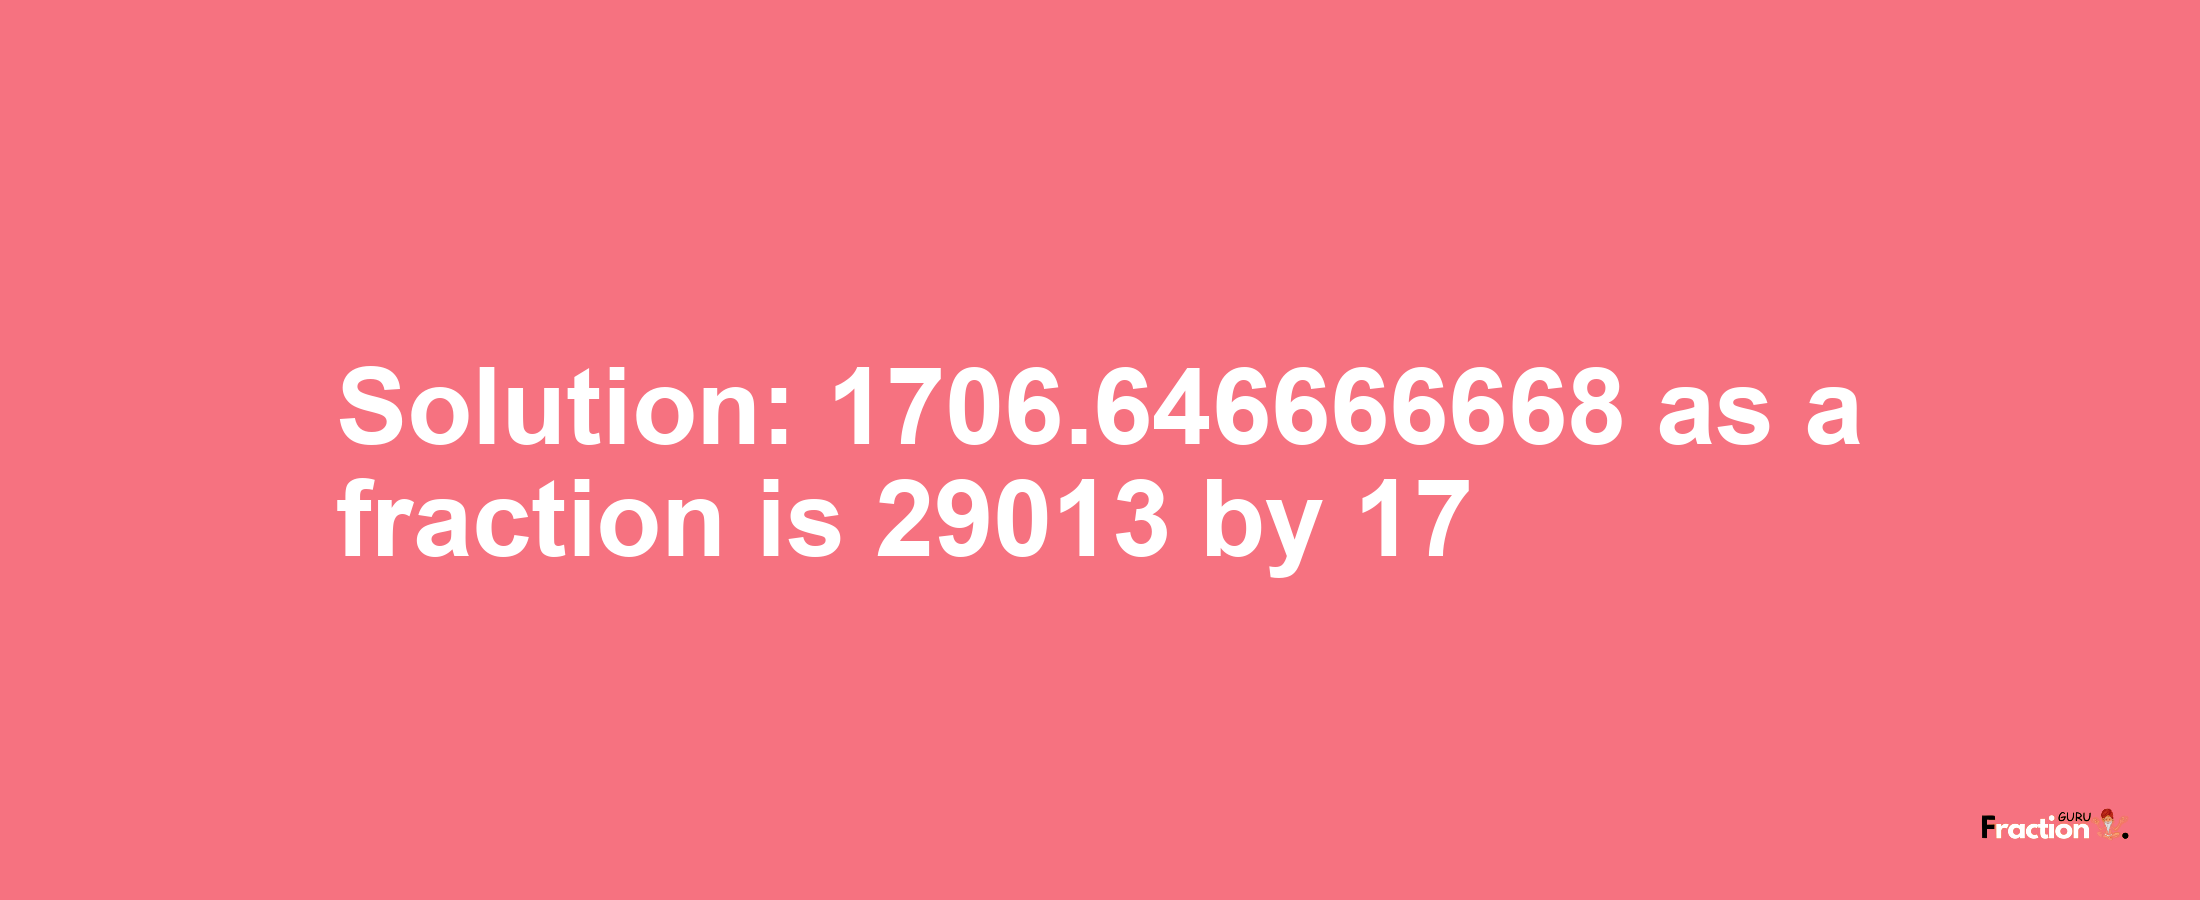 Solution:1706.646666668 as a fraction is 29013/17